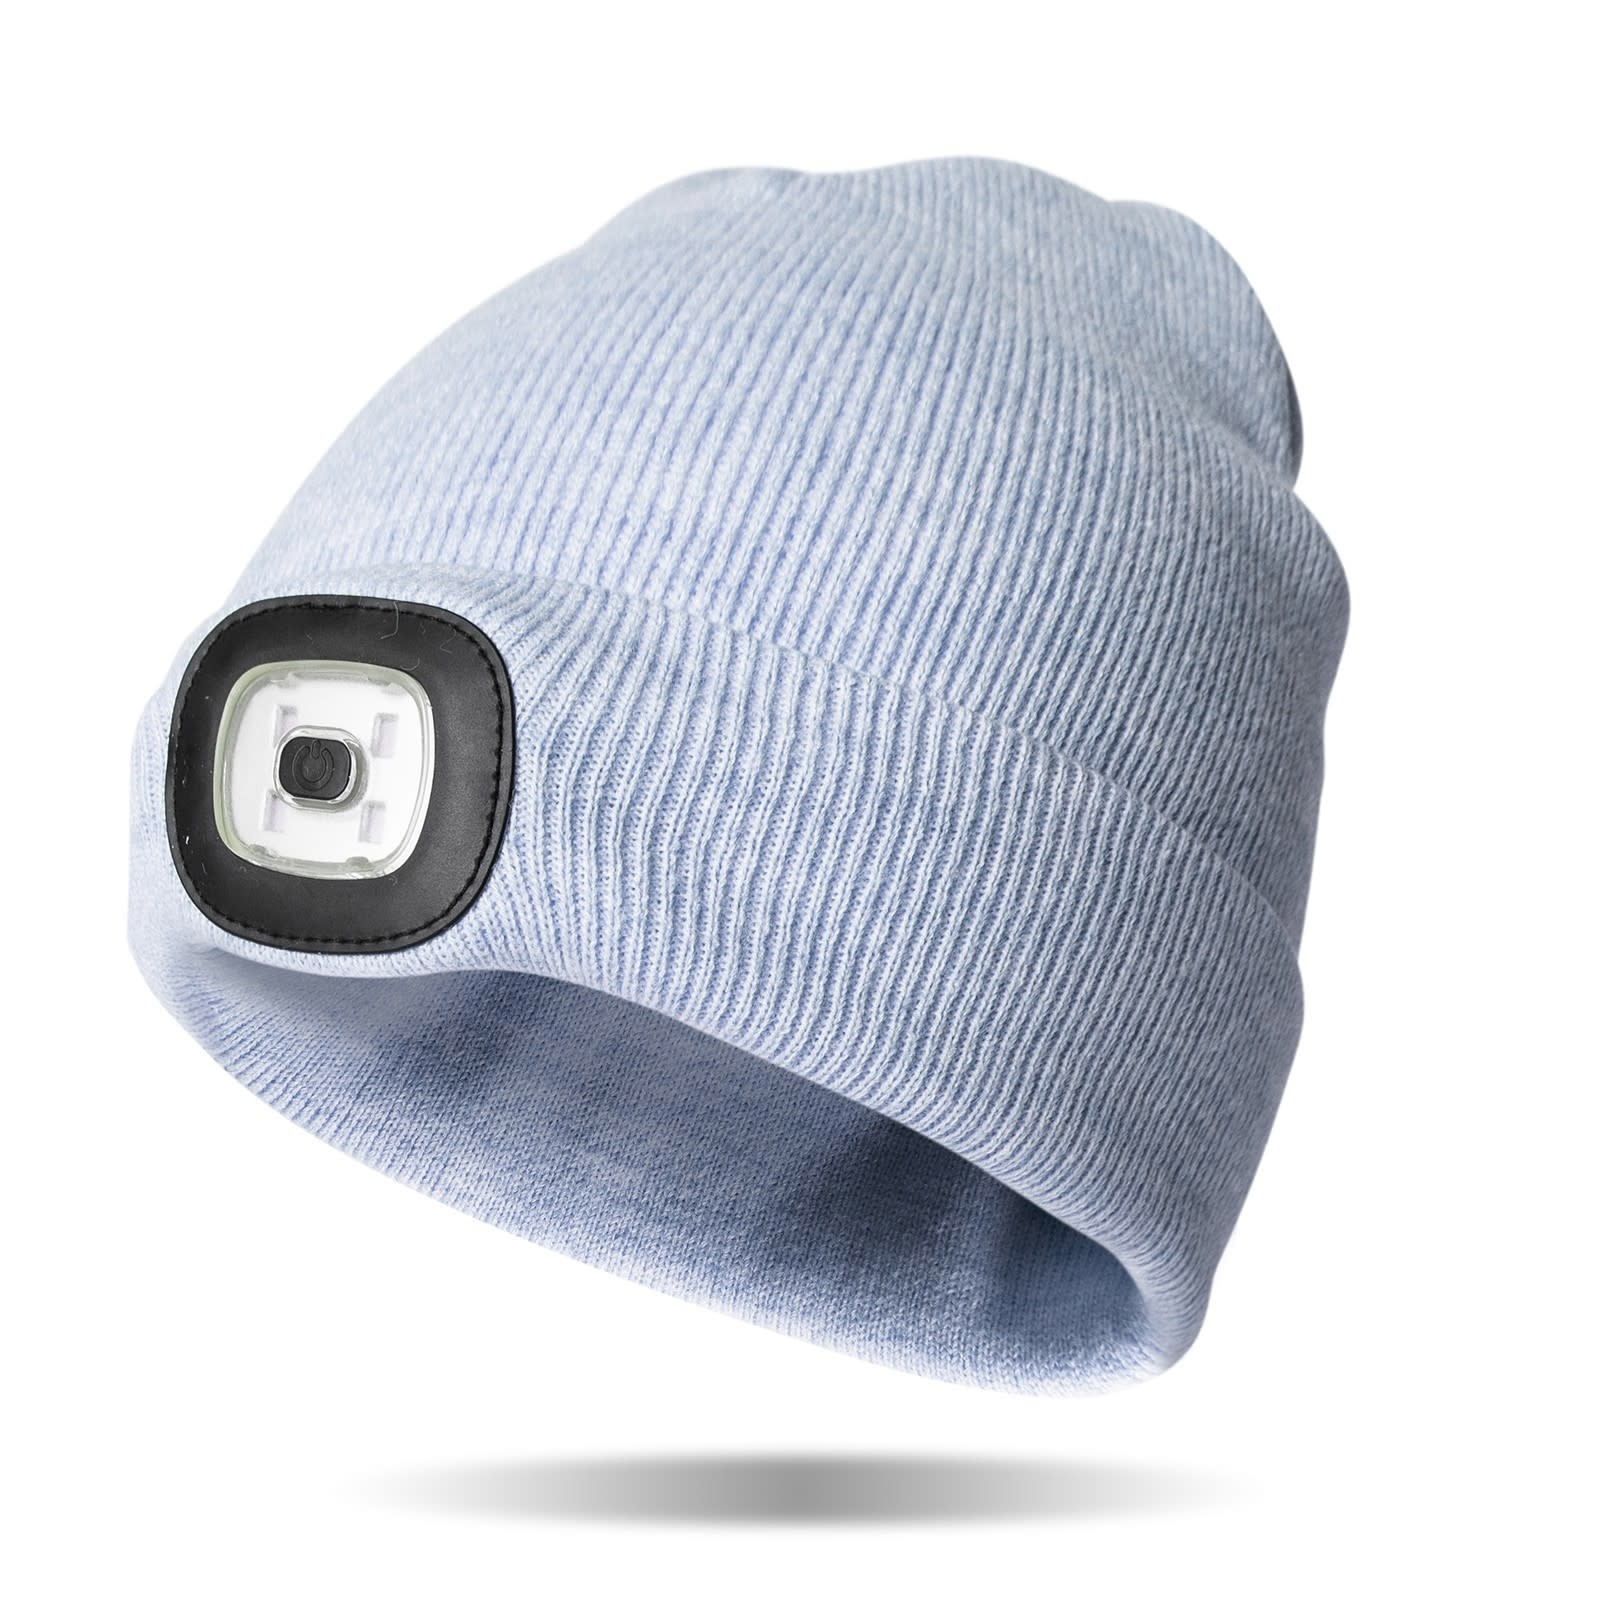 Night Scout Night Scout LED Flashlight LIGHT BLUE Knit Beanie Hat (USB rechargeable)